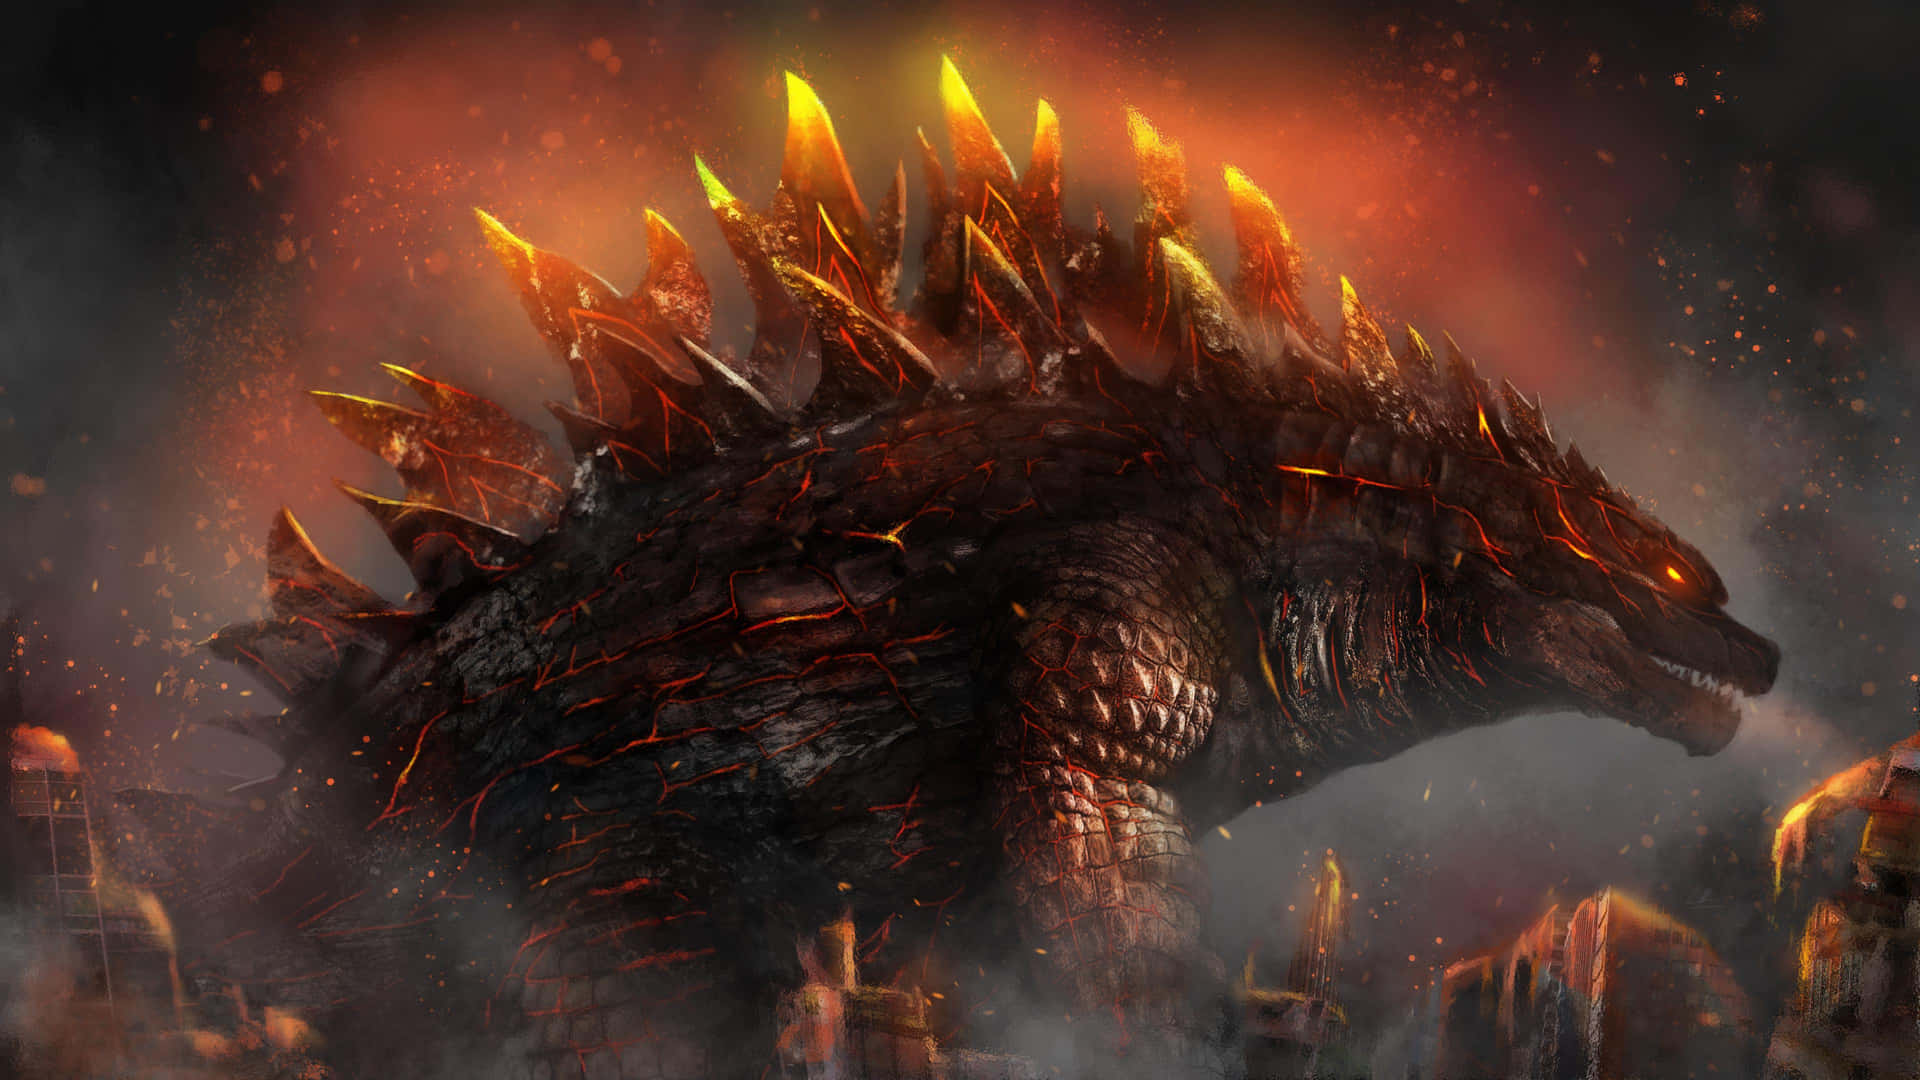 Godzilla With Fire Effects On Spikes Picture